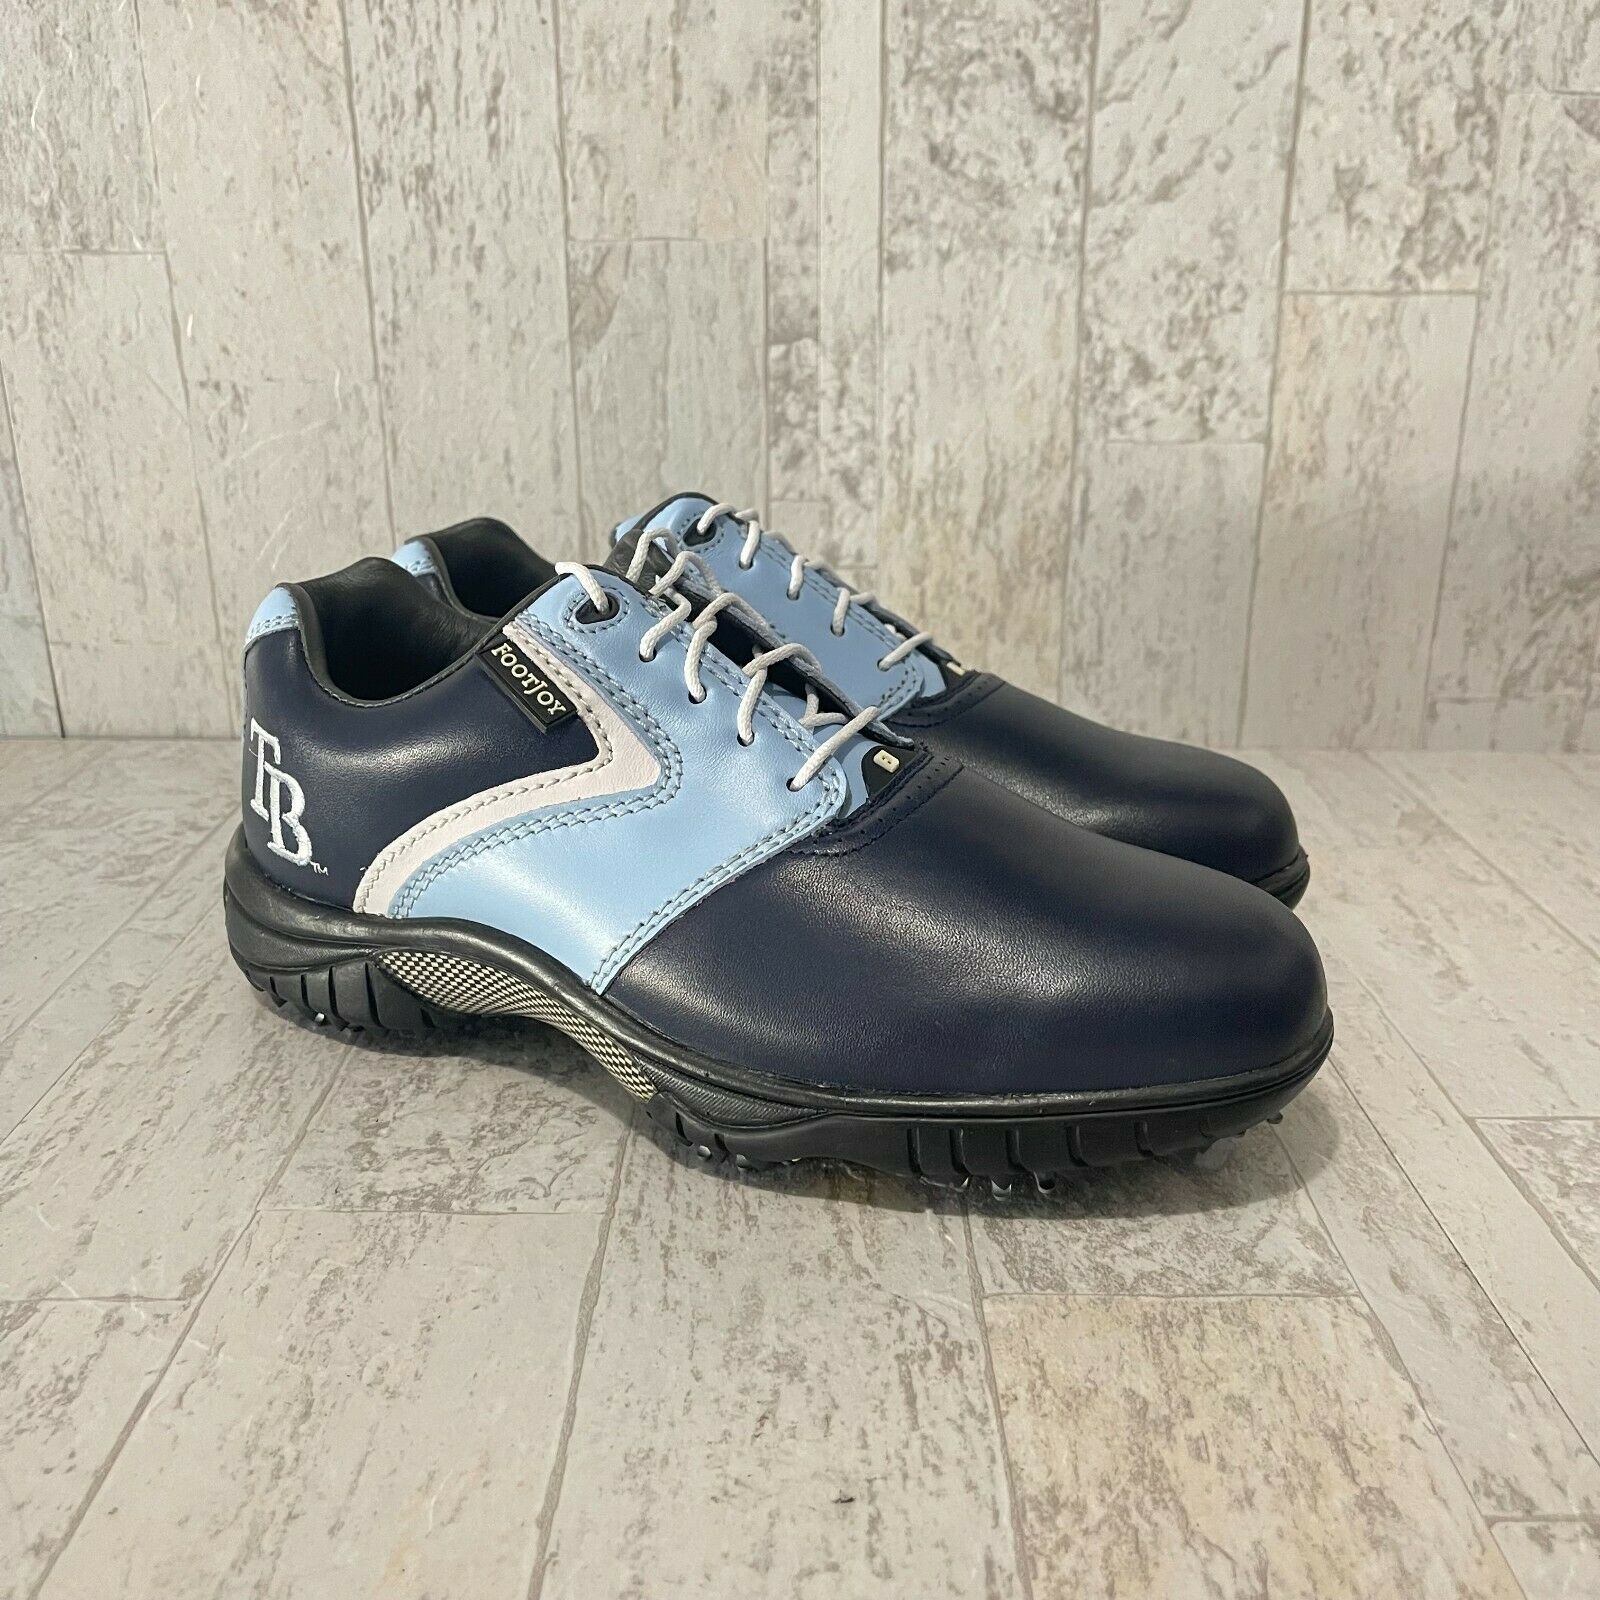 FootJoy Contour Series Golf Shoes TB Tampa Bay Rays Collab Men's Size 7 New